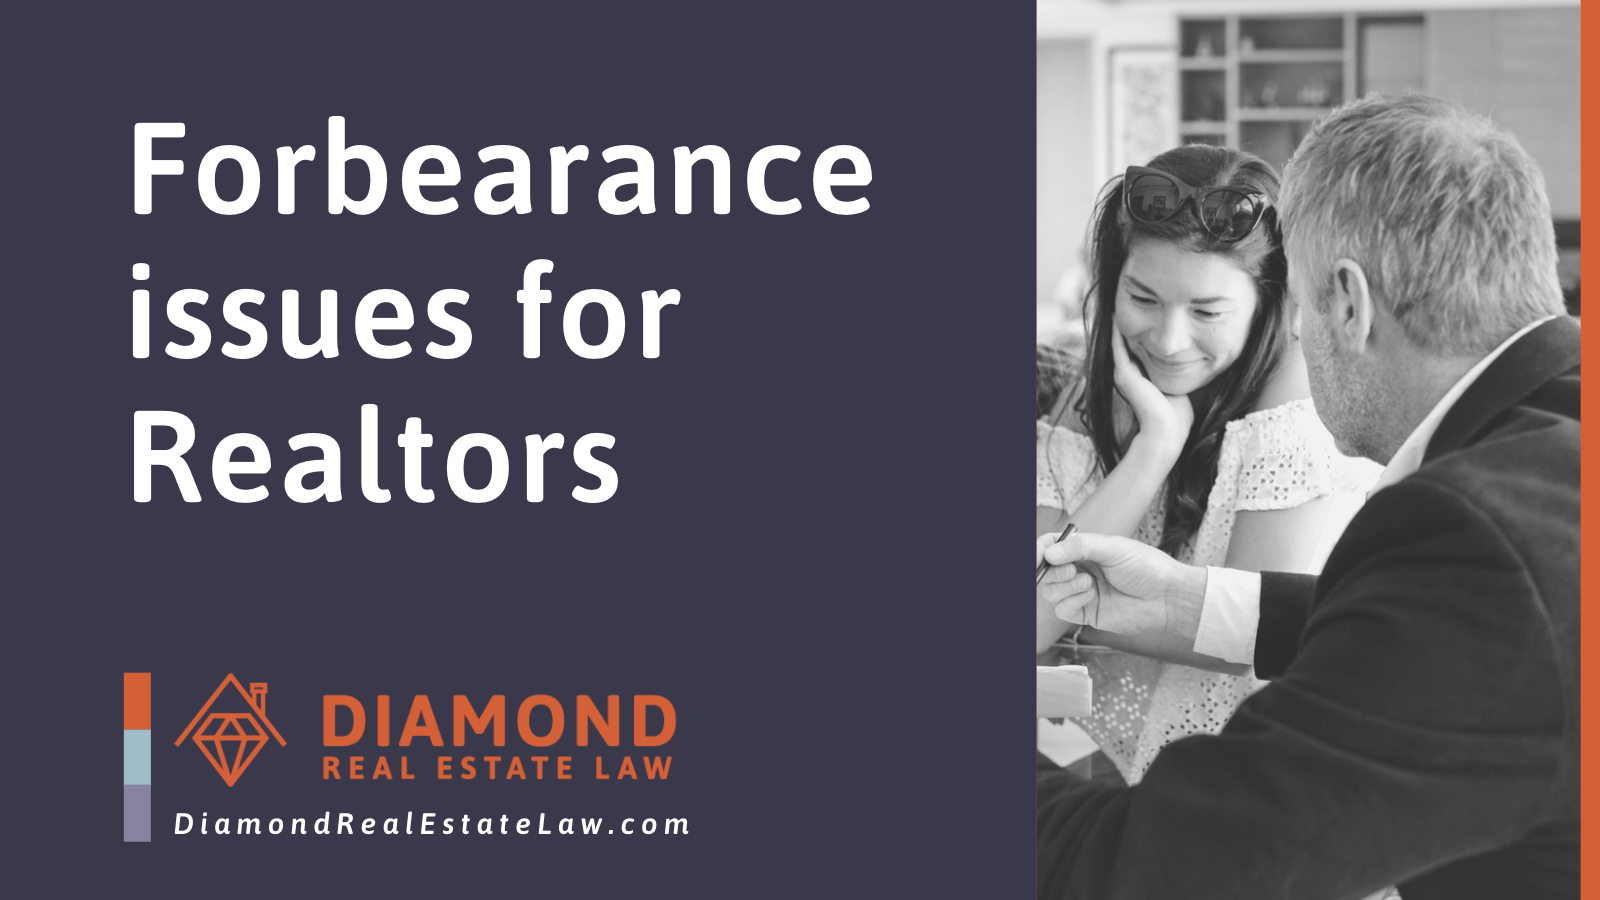 Forbearance issues for Realtors - Diamond Real Estate Law | McHenry, IL Residential Real Estate Lawyer